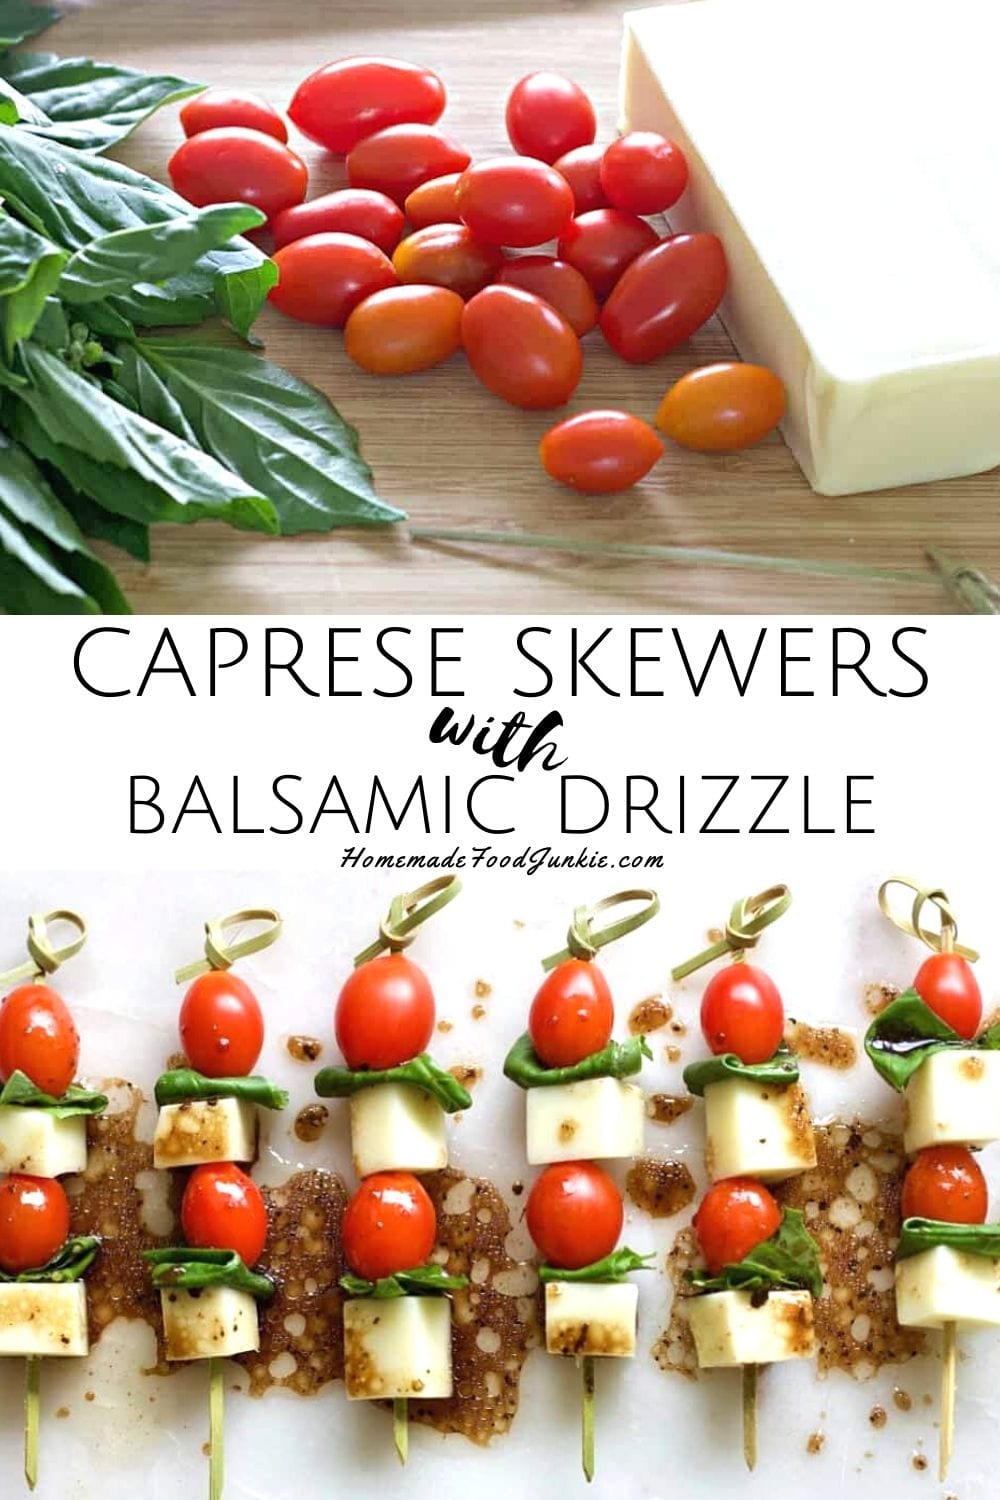 Caprese Skewers With Balsamic Drizzle-Pin Image